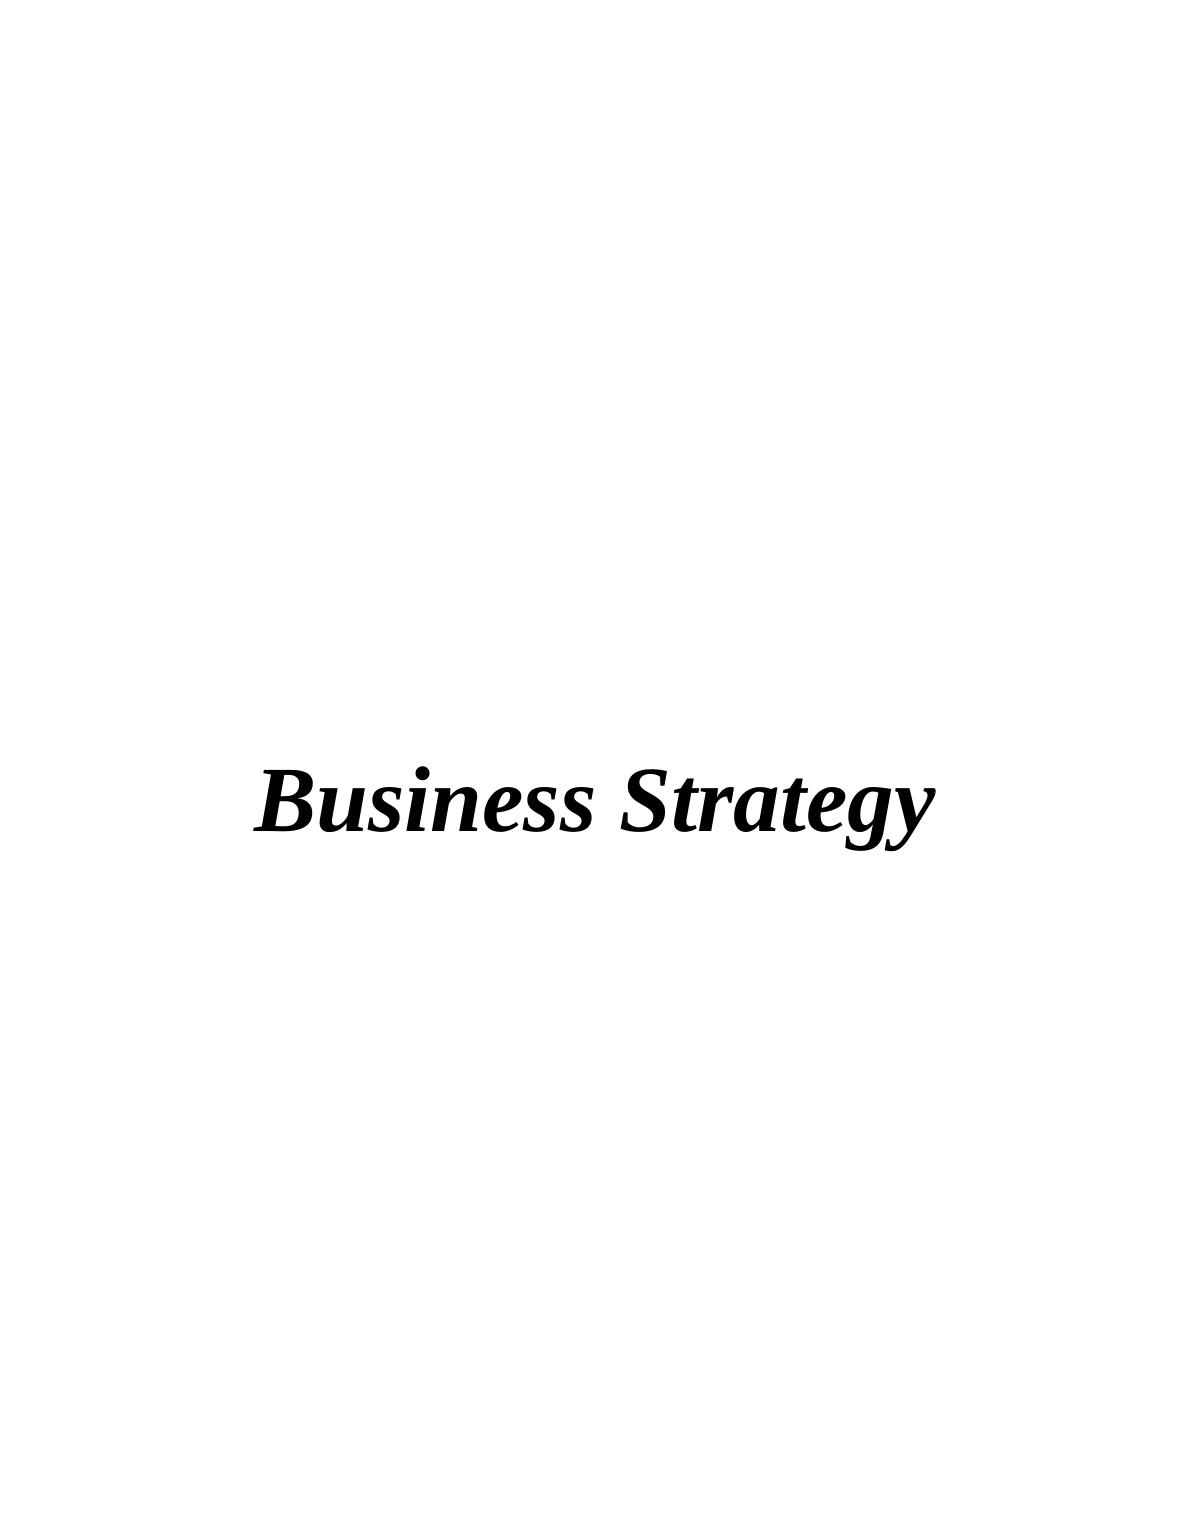 Business Strategy Project Report - ALDI_1